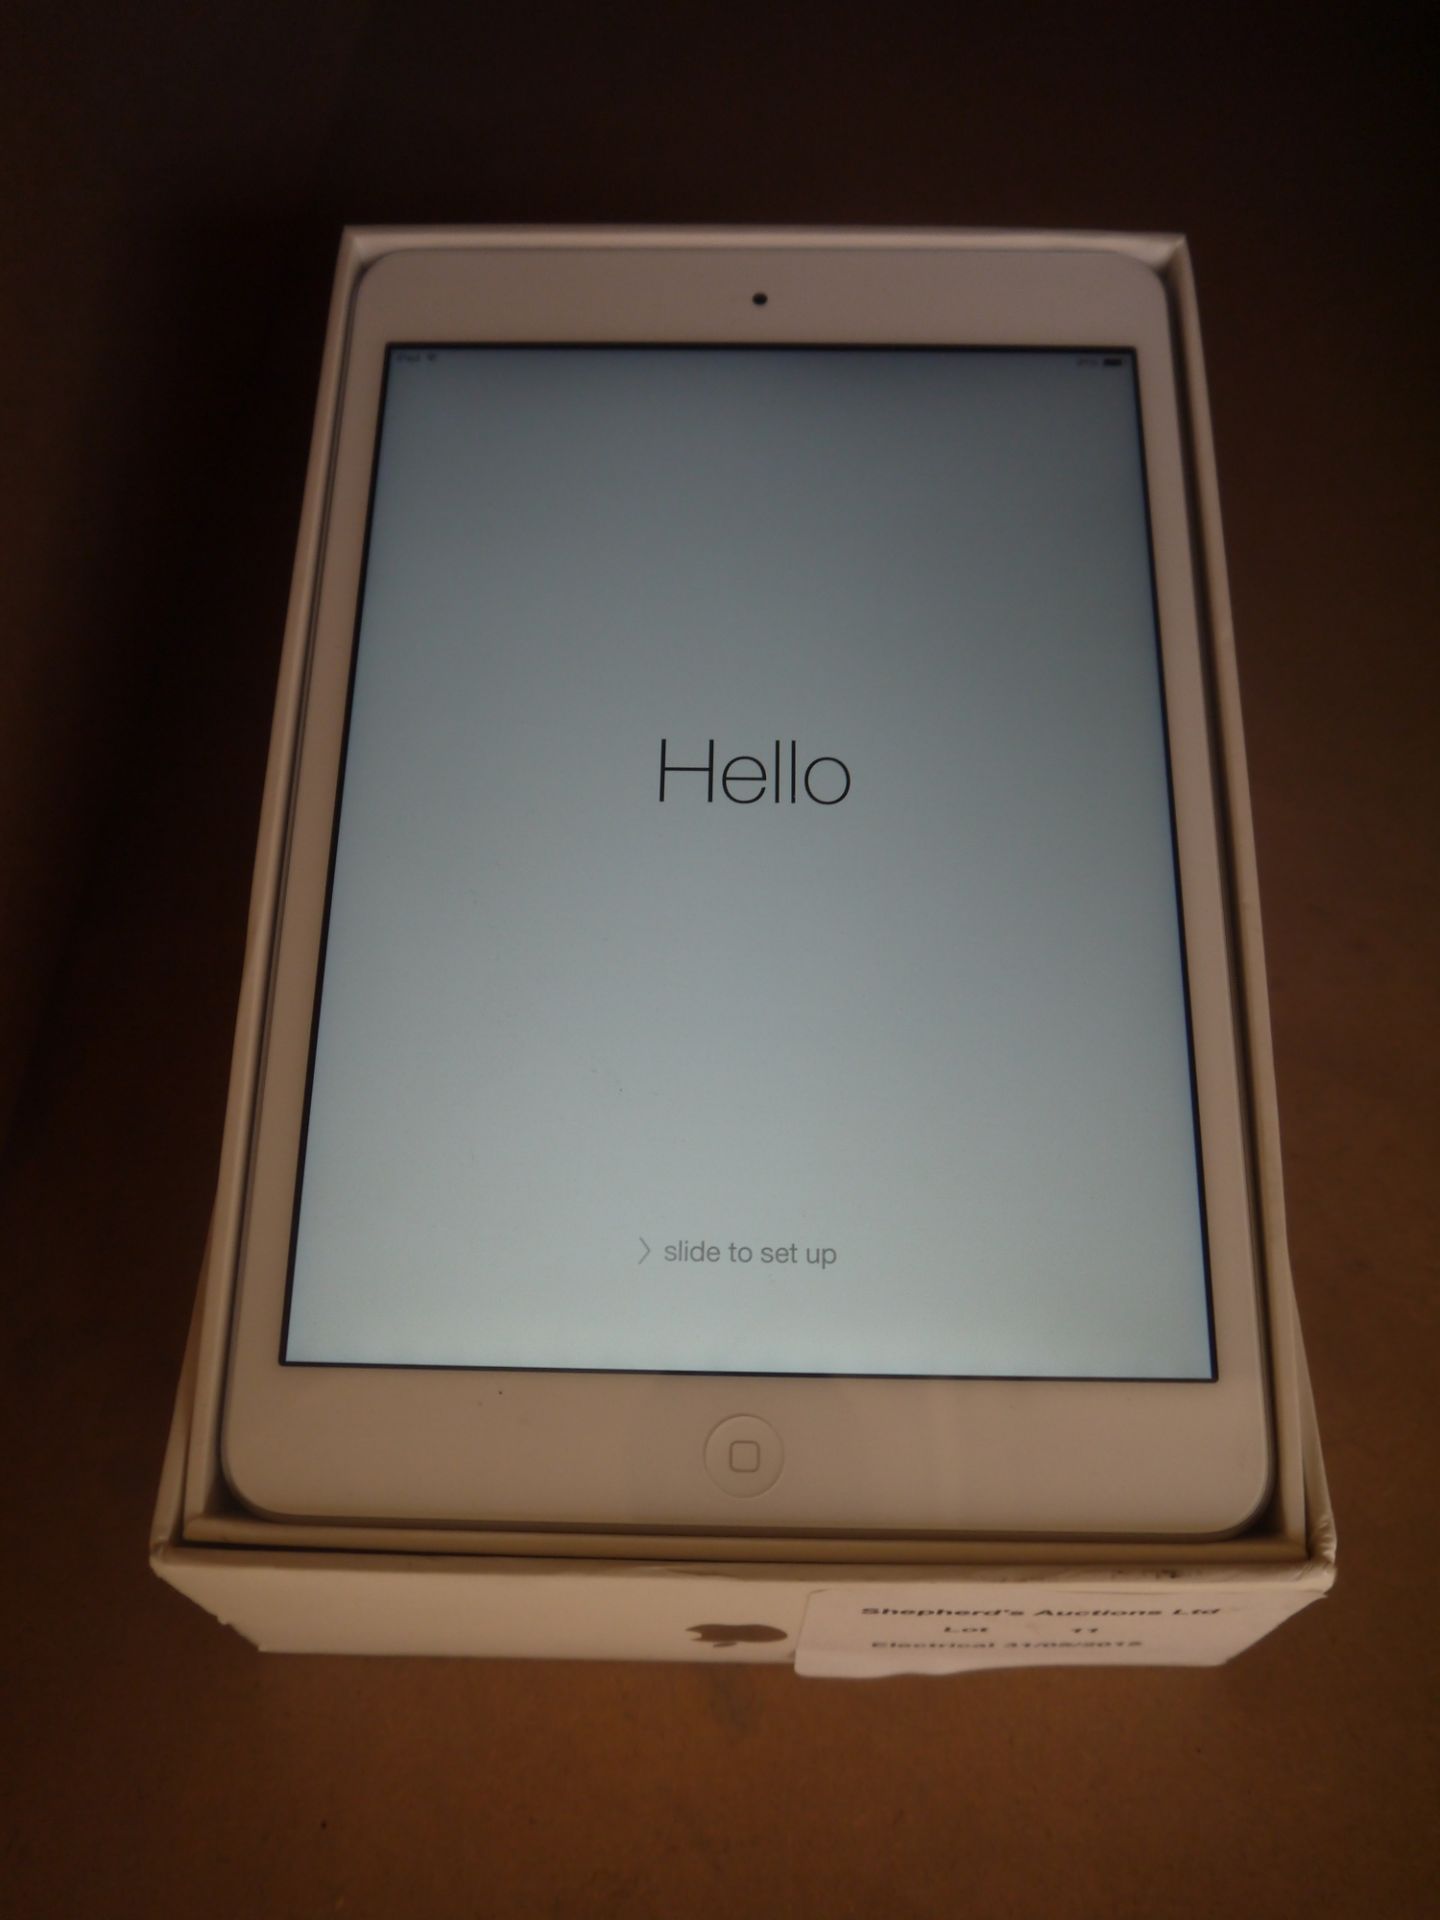 Apple iPad Mini 2, 32GB with retina display, working, on first person set up with original box but